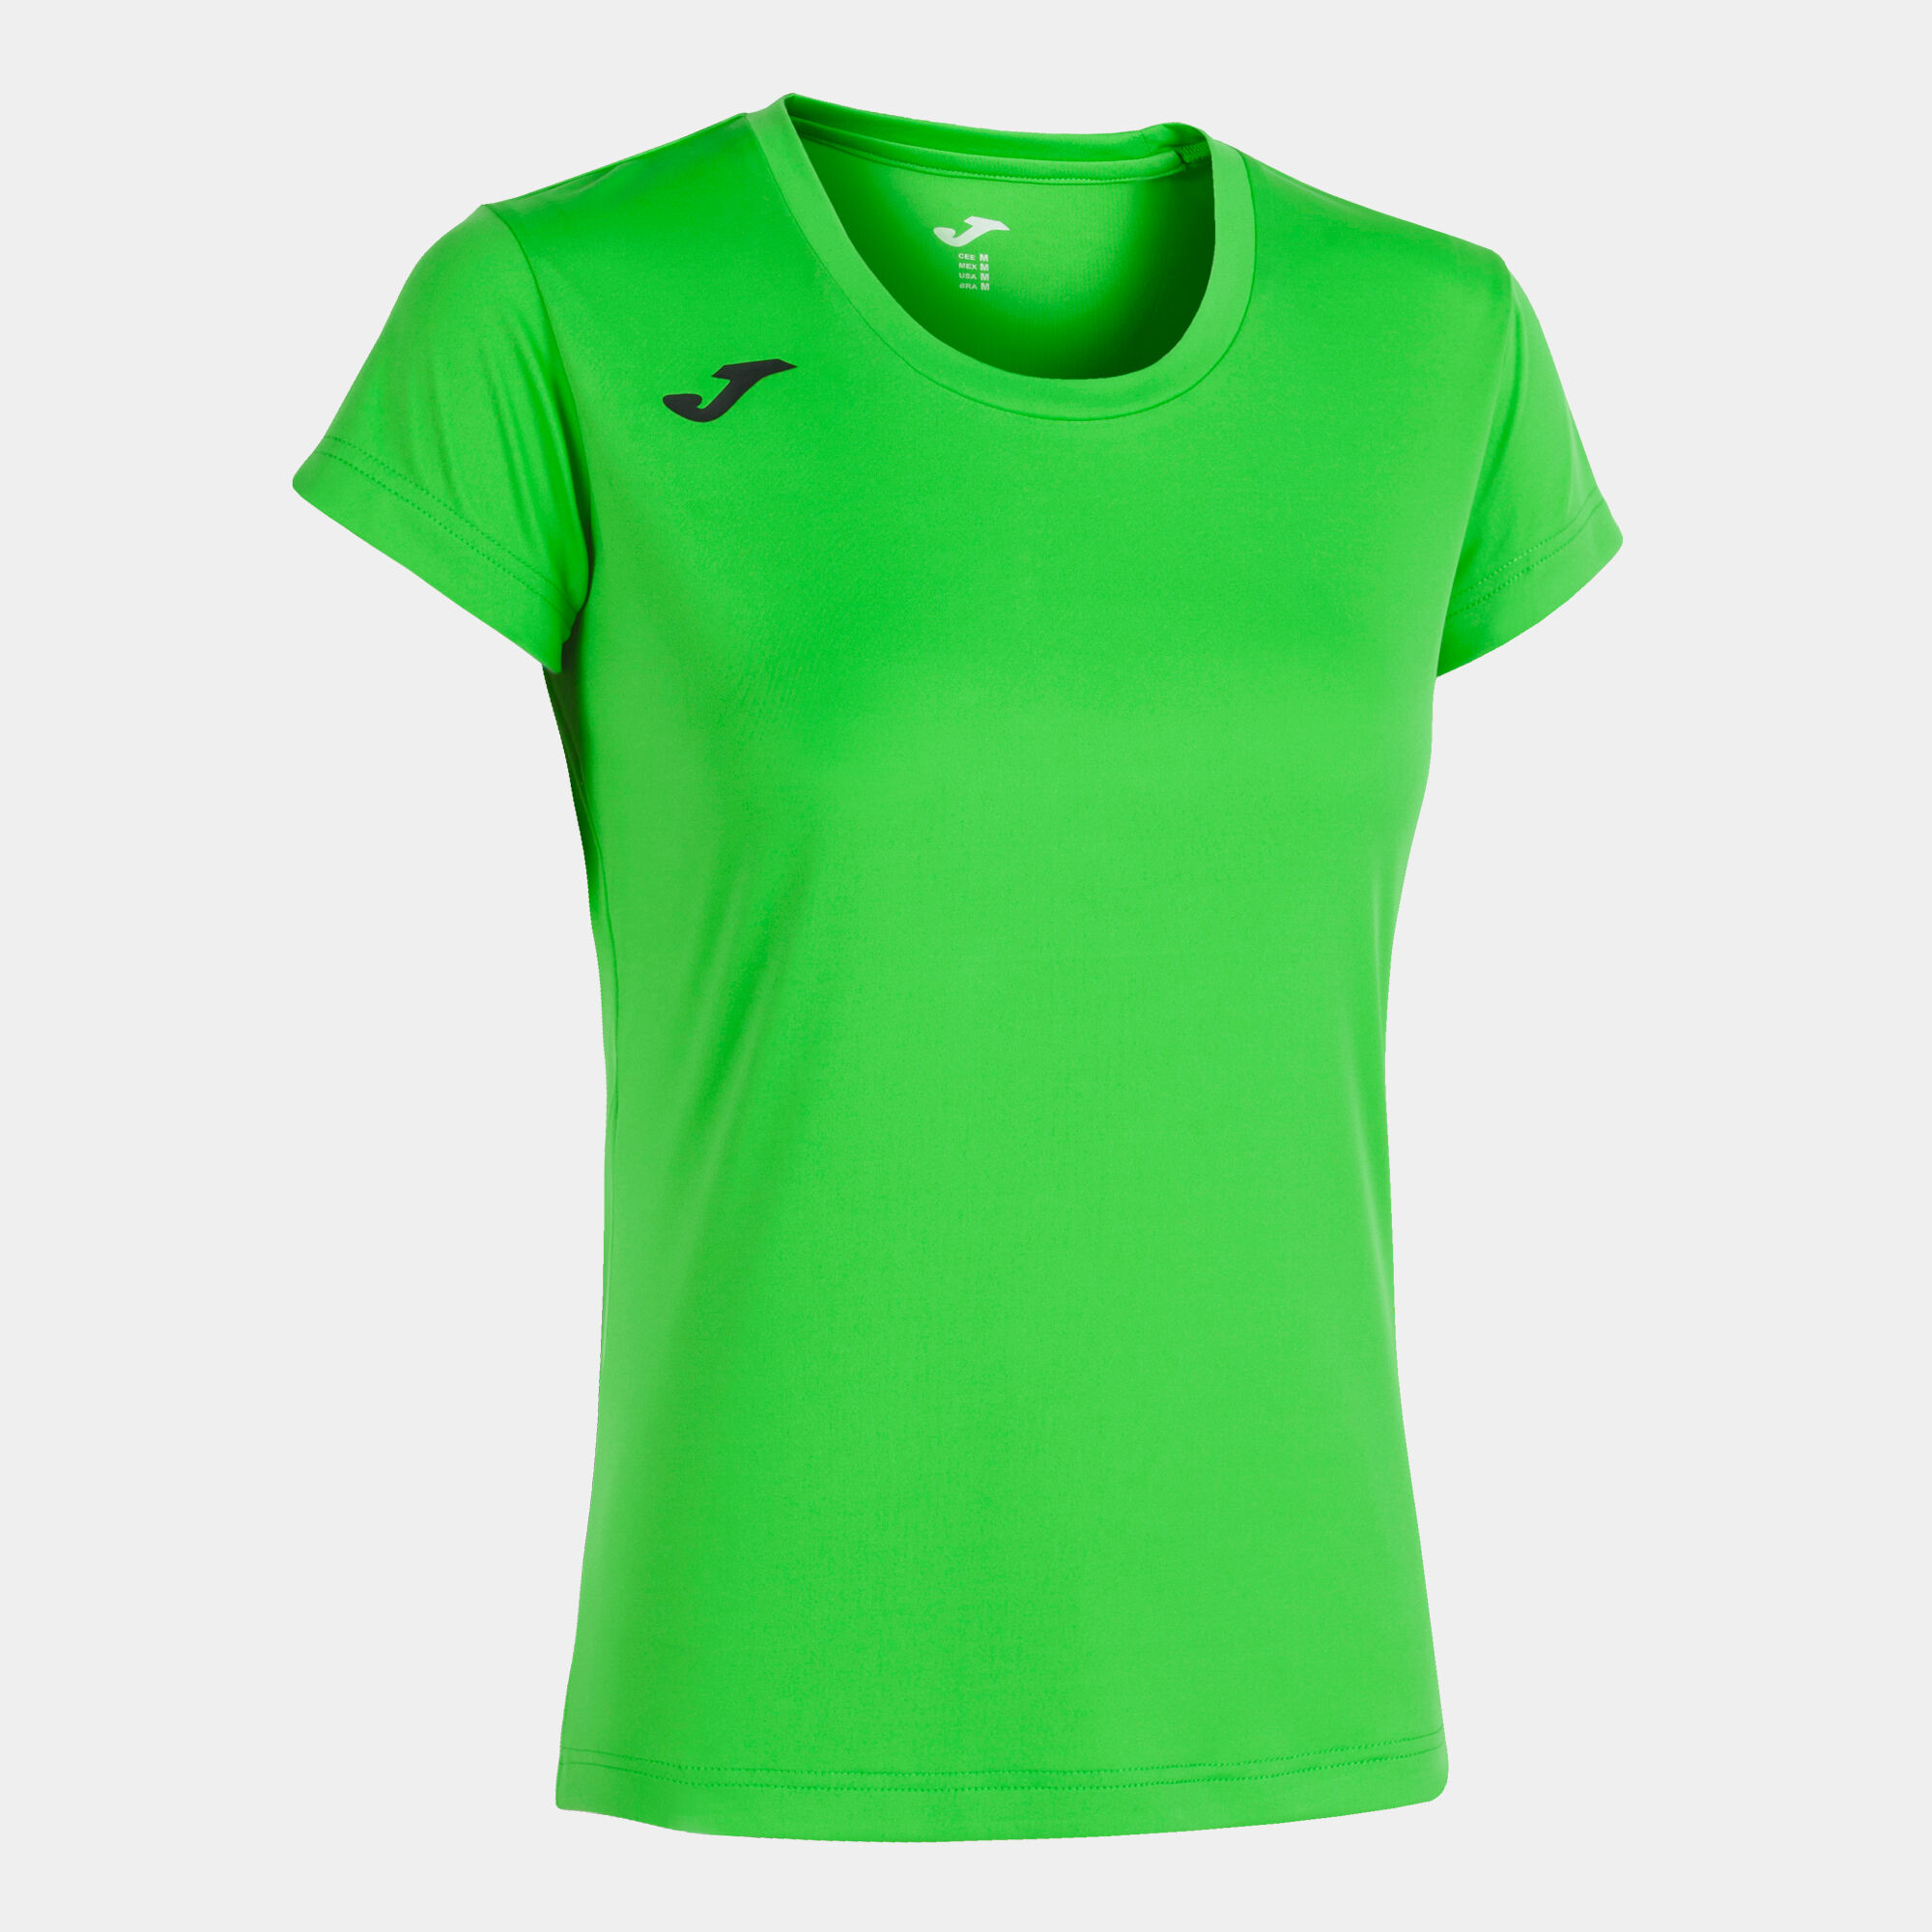 MAILLOT MANCHES COURTES FEMME RECORD II VERT FLUO